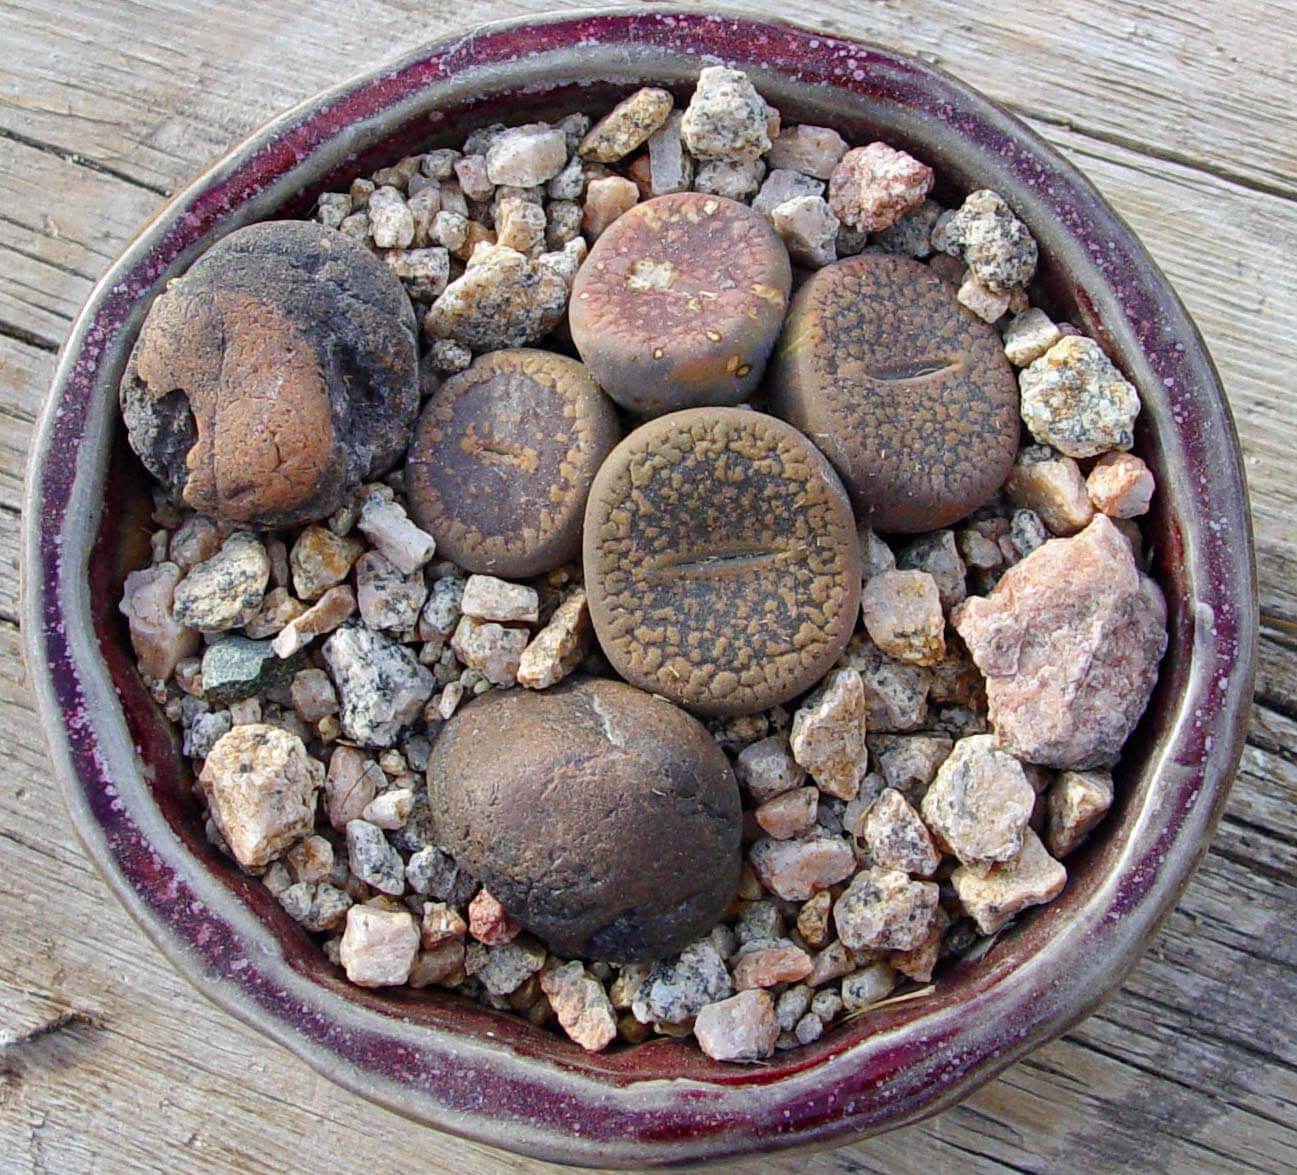 A pot lithops with pebbles that match to show its unique ability to blend into gravel for protection.